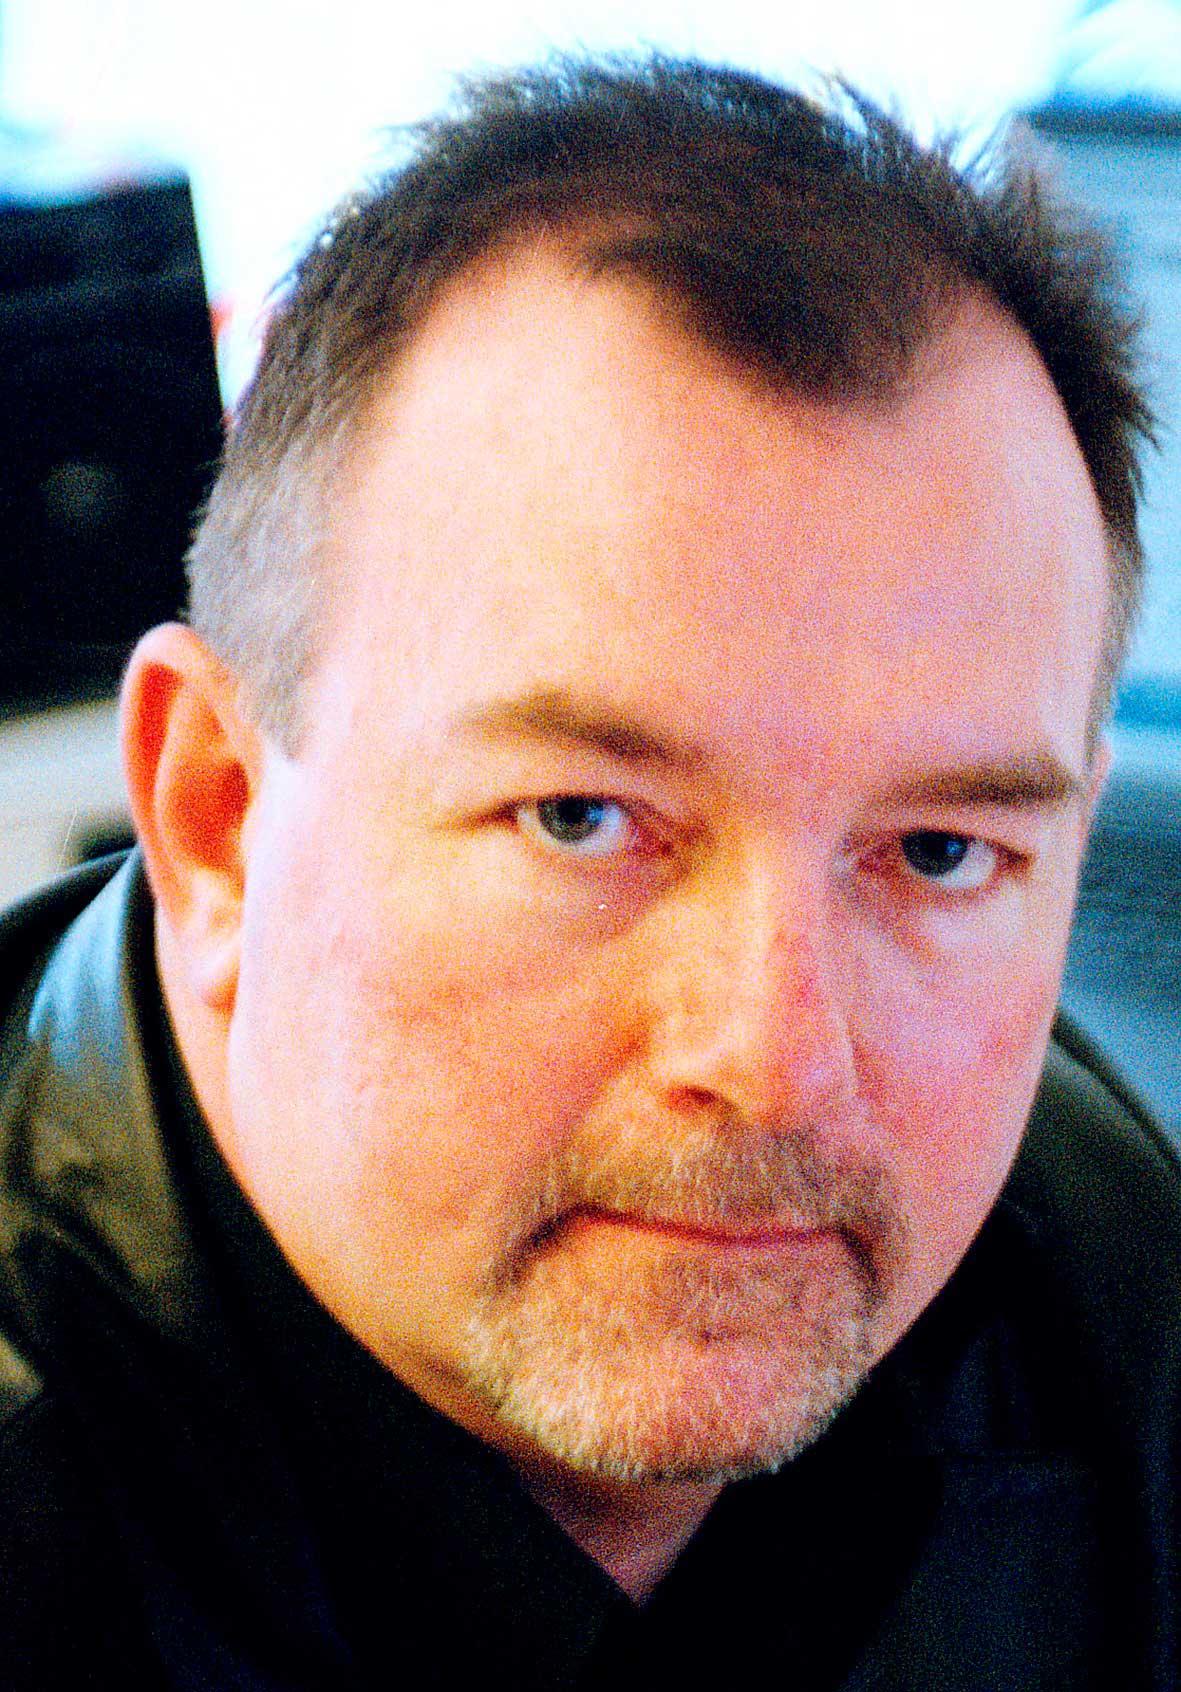 Anders Ahlqvist.